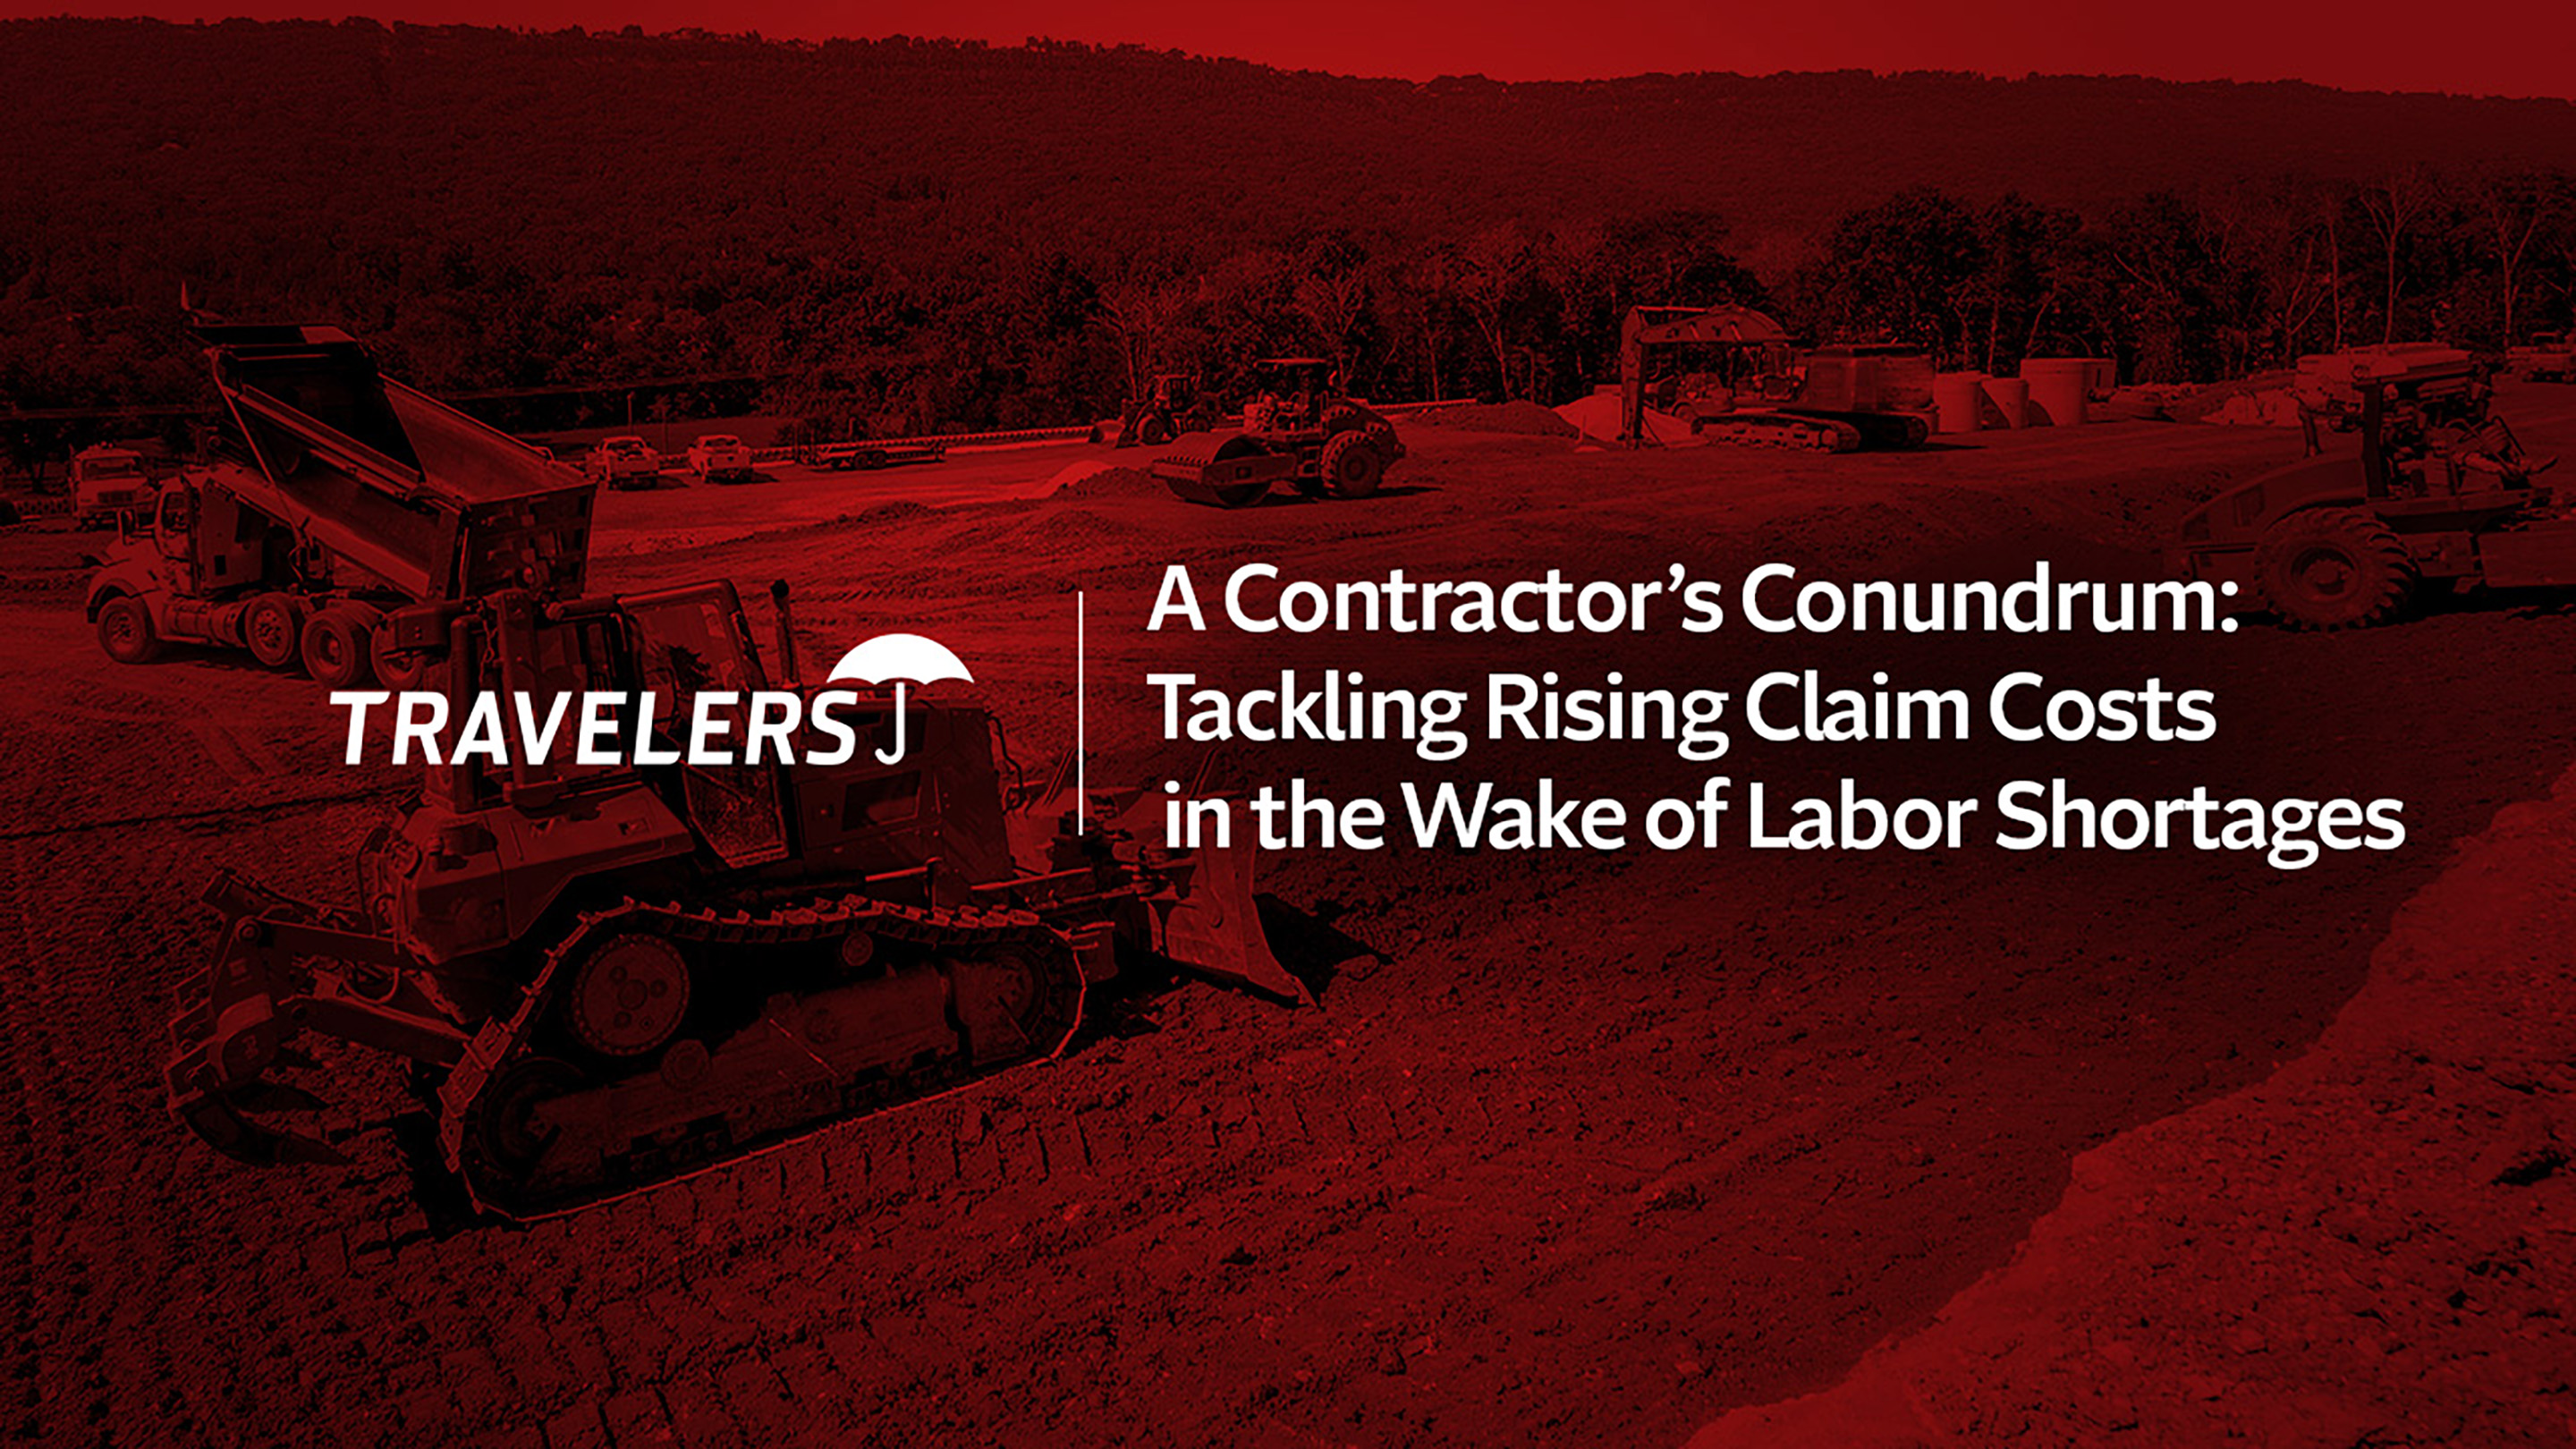 Travelers logo on a red webinar background with the words "A Contractor’s Conundrum: Tackling Rising Claim Costs in the Wake of Labor Shortages" on it.